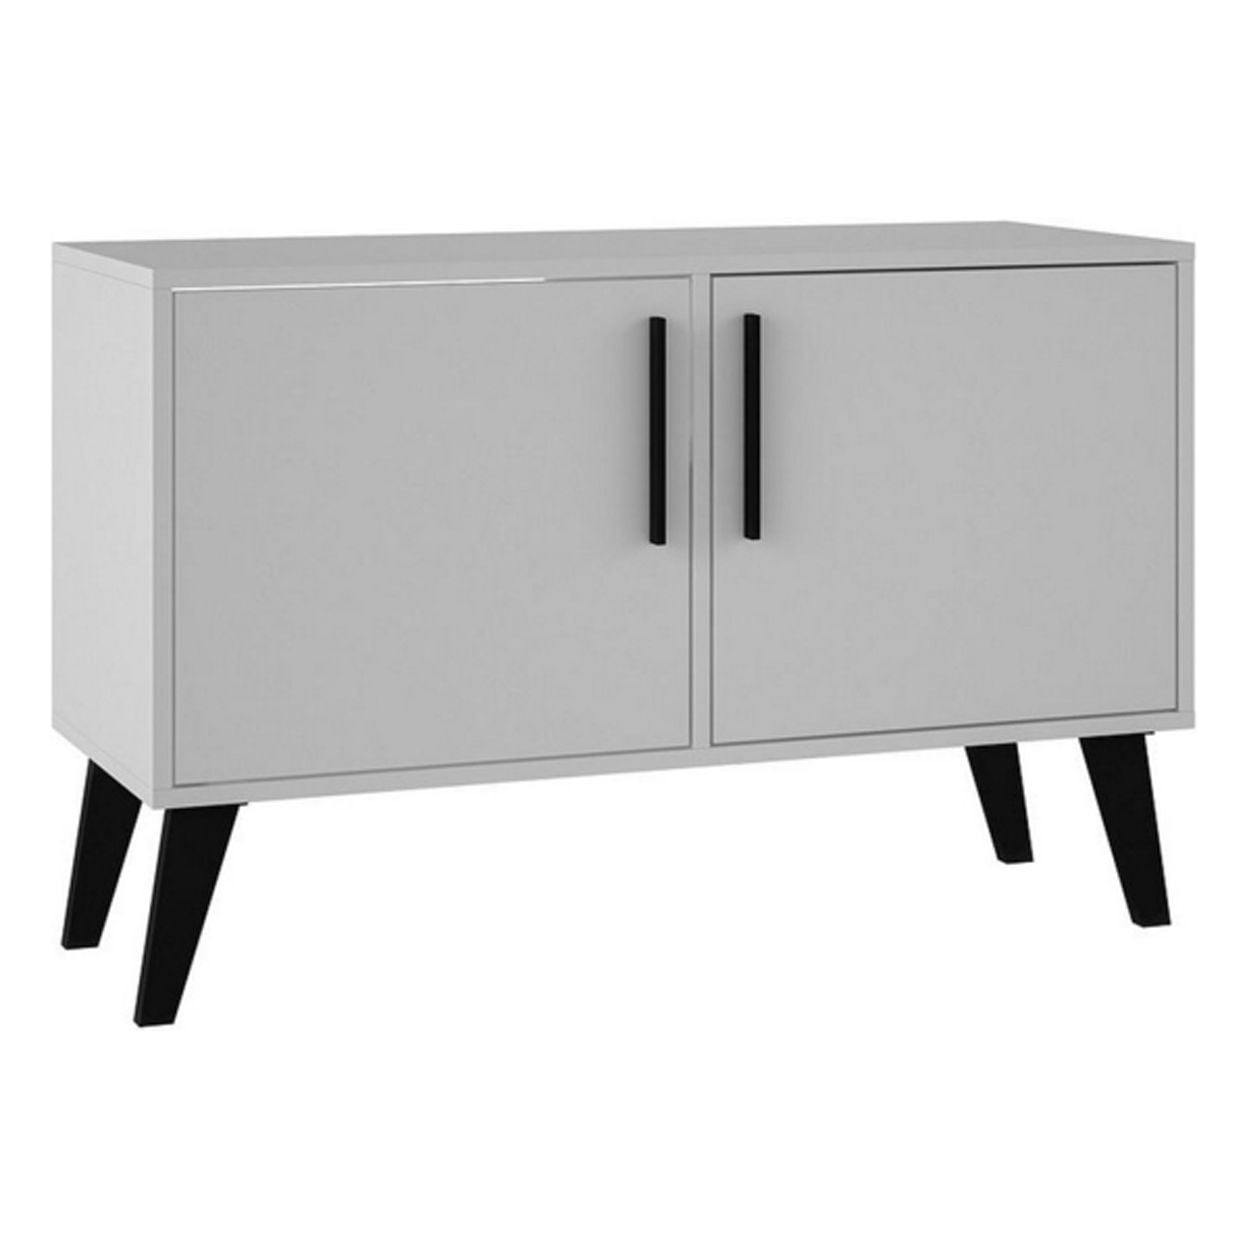 Amsterdam Chic Mid-Century Modern White Wood Console with Storage